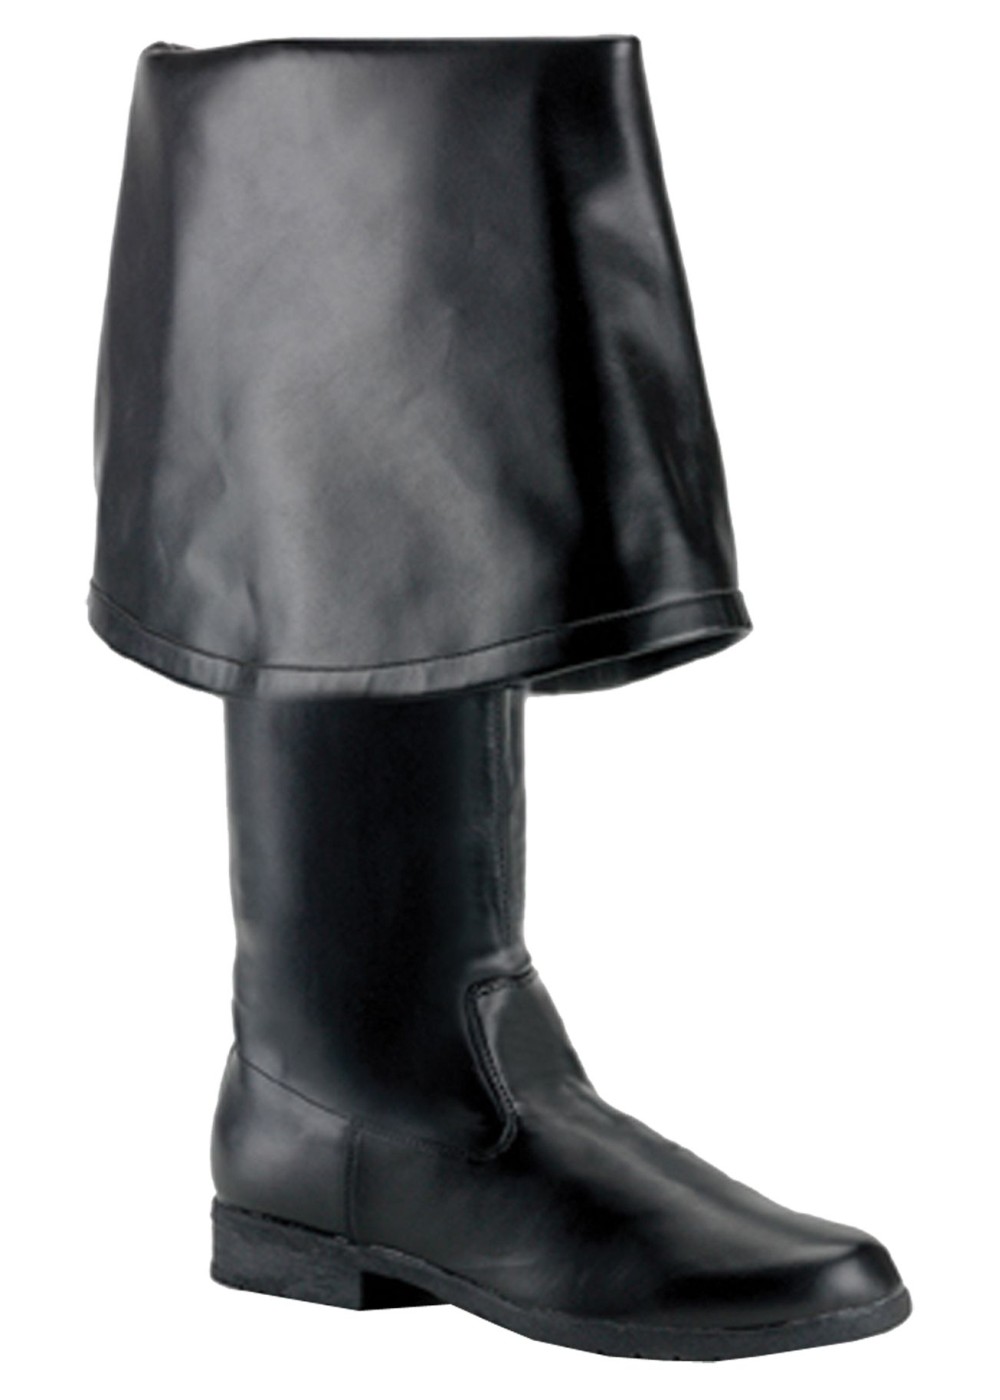 Mens Tall Black Fold Over Pirate Boots